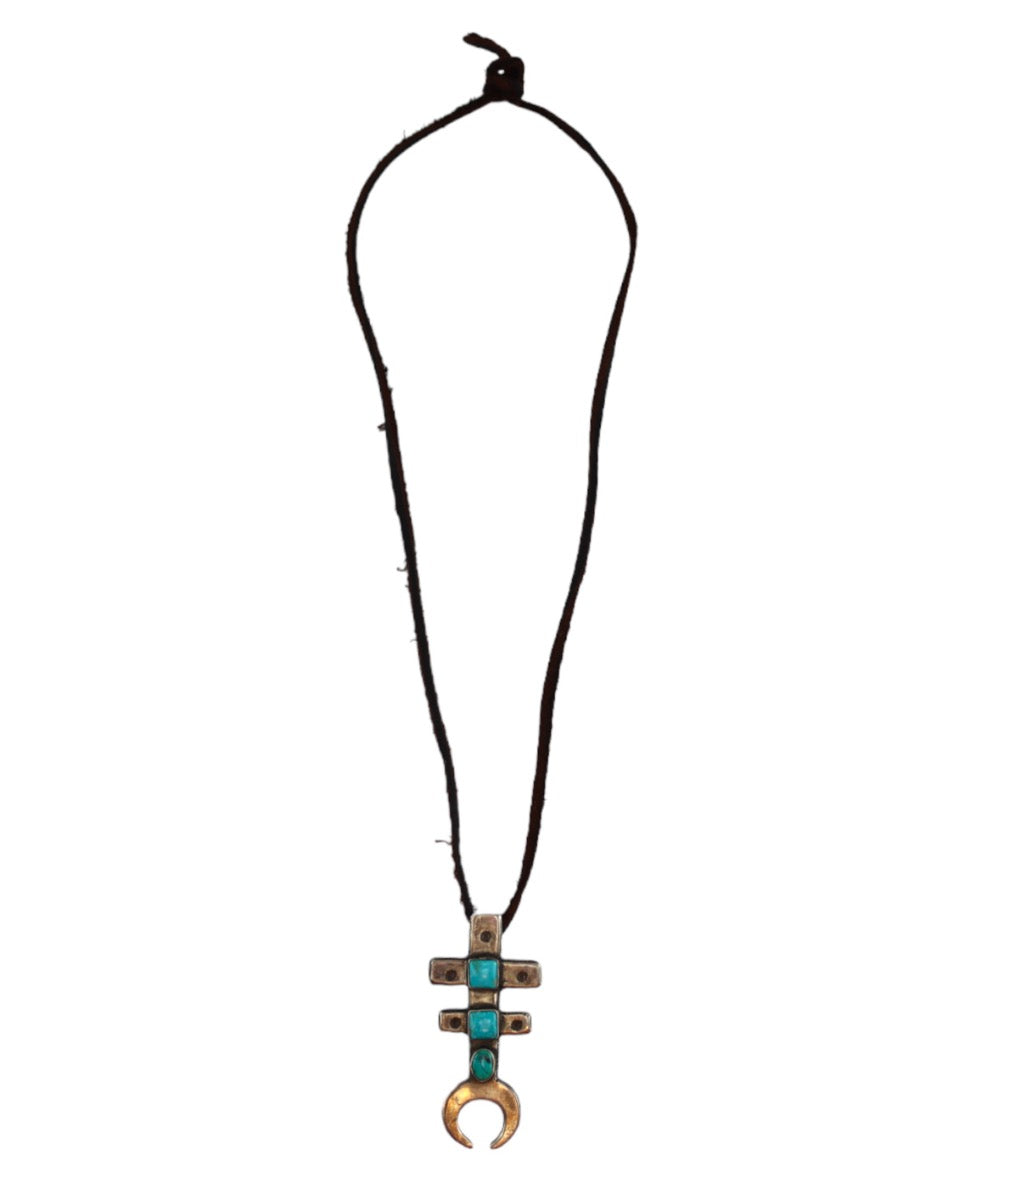 Buffalo (Non-Native) - Turquoise and Ingot Silver Revival Pendant with Leather Cord c. 1990s, 3.25" x 1.25" (J15811-002)